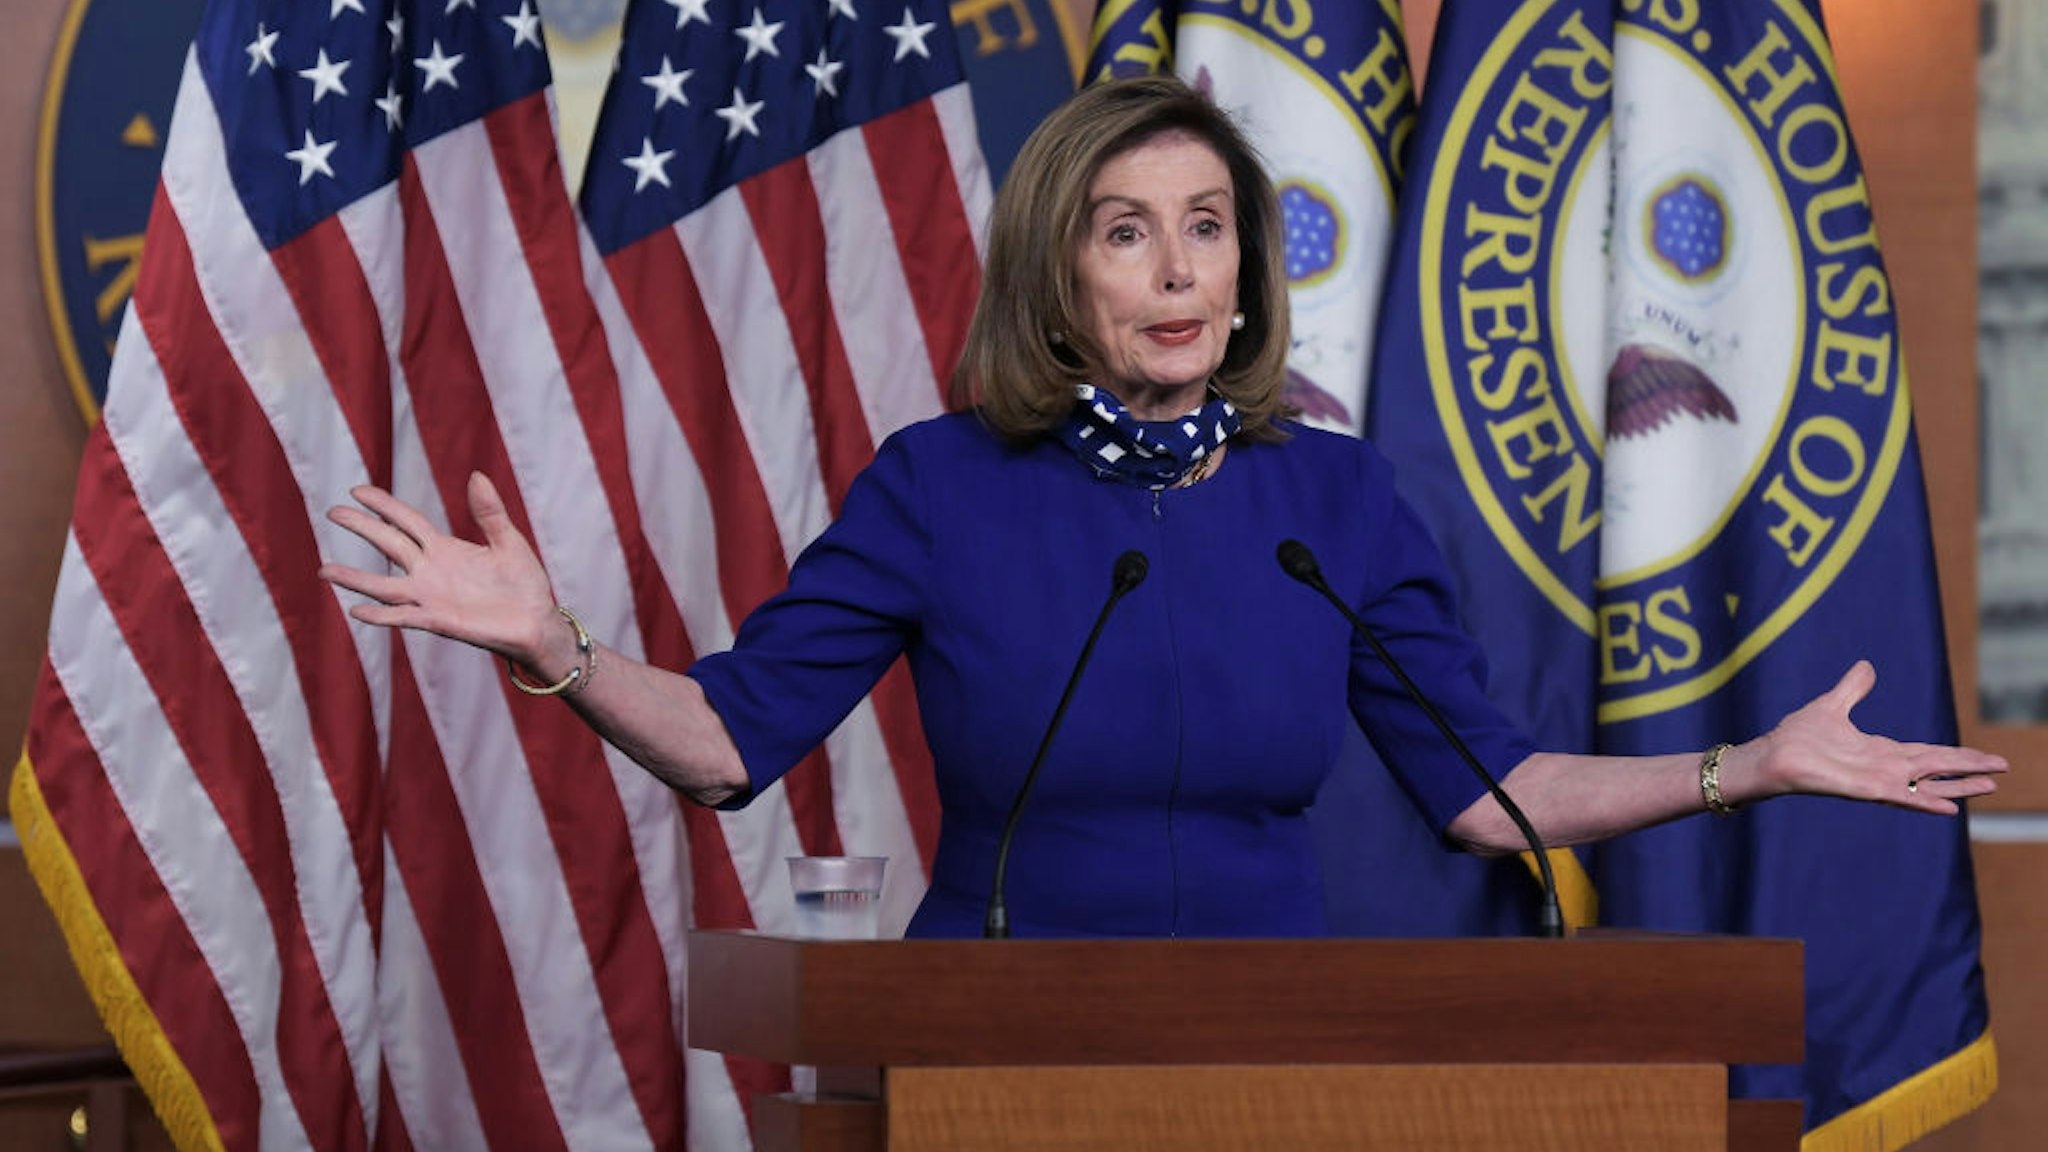 US House Speaker Nancy Pelosi hold a weekly press conference today on August 27, 2020 at HVC / Capitol Hill in Washington DC, USA.